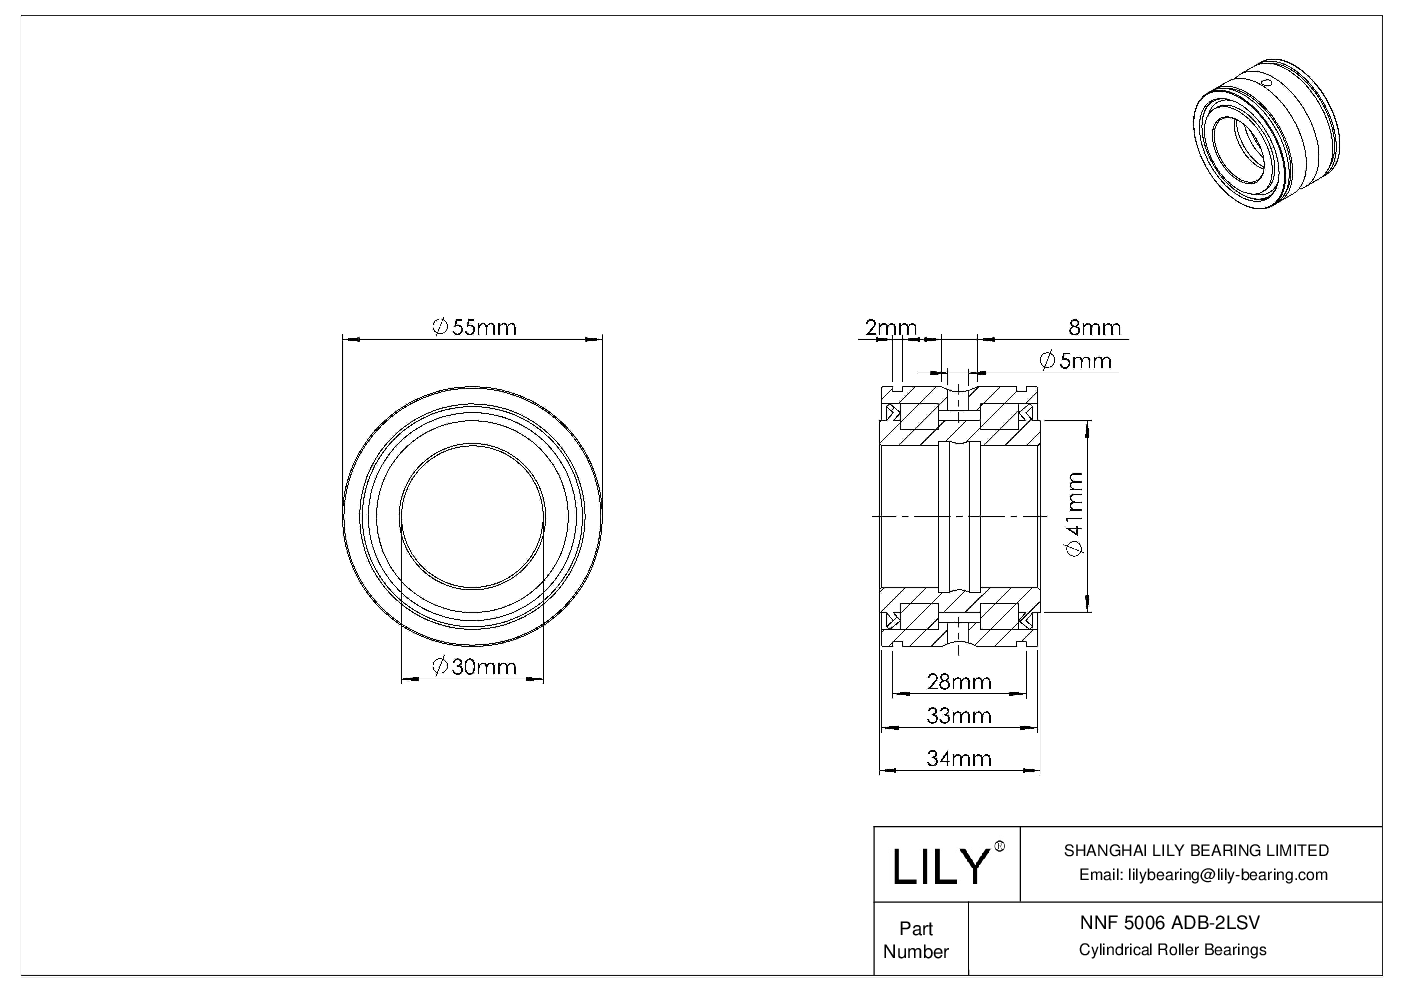 NNF 5006 ADB-2LSV Double Row Full Complement Cylindrical Roller Bearings cad drawing